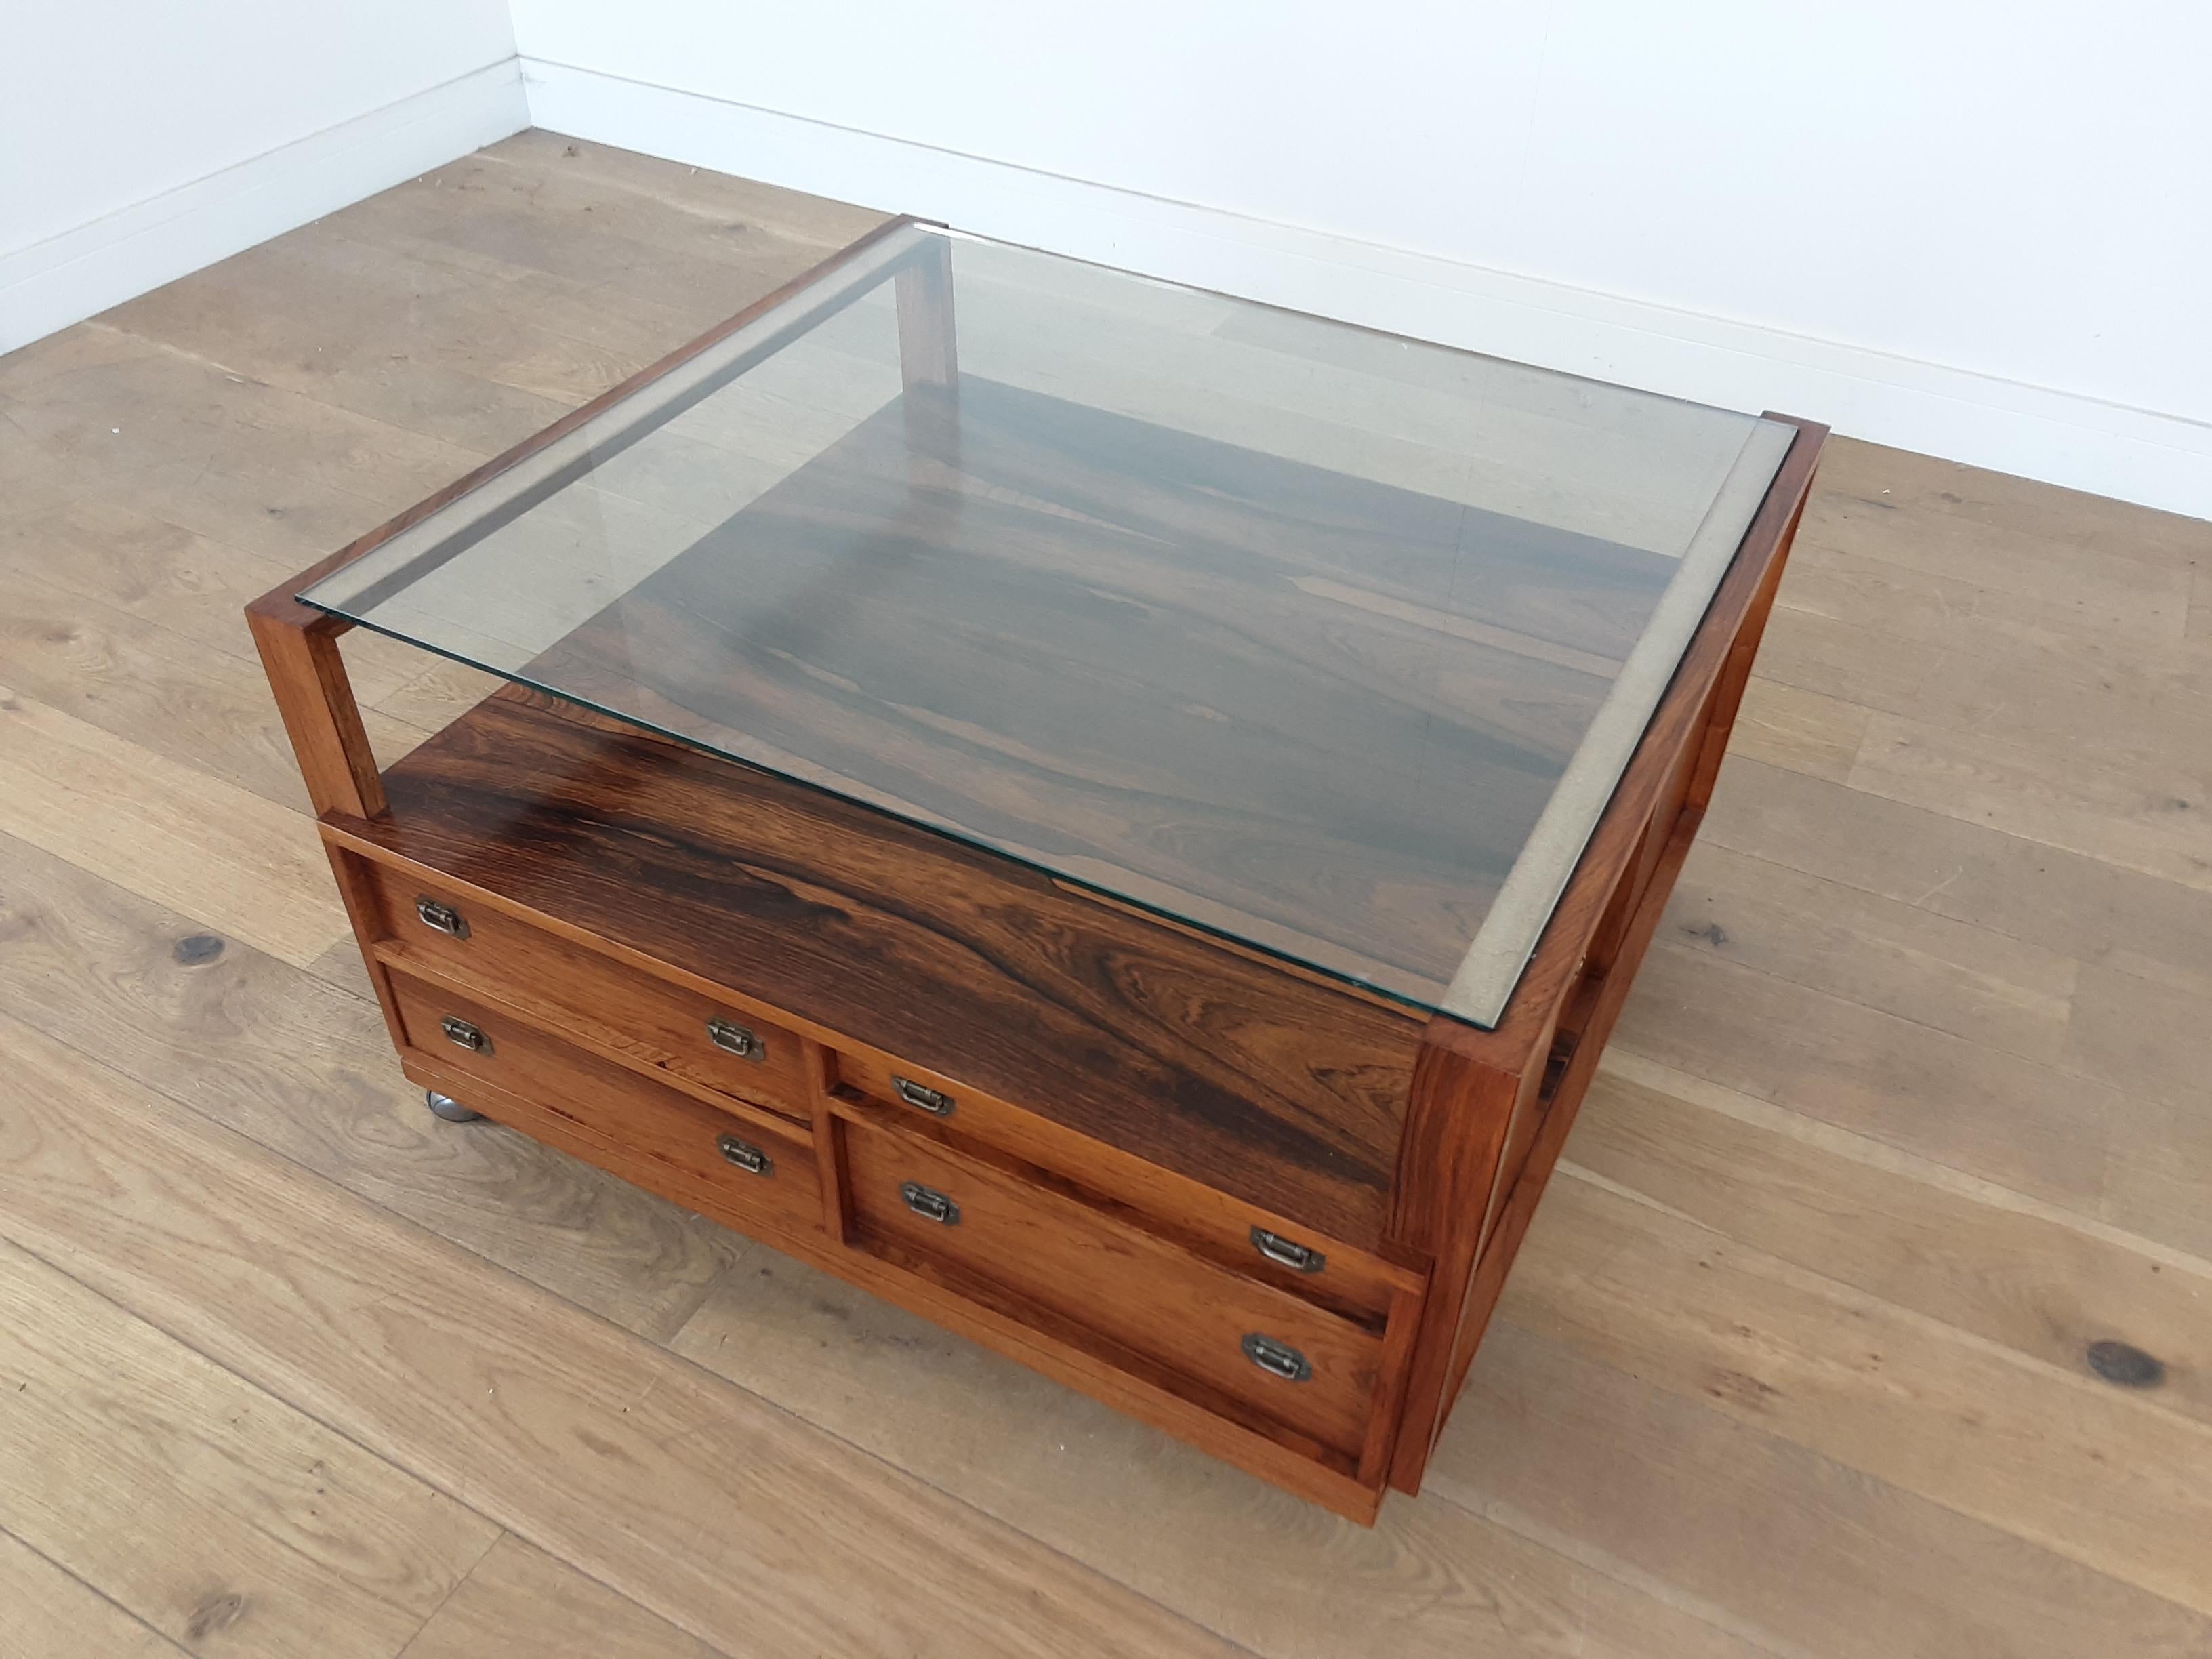 Midcentury rosewood table with lots of drawers and compartmented drawers and storage spaces.
A very versatile centre table on castors for easy movement, beautiful rosewood with practical plate glass top.
Measures: 50 cm H 85 cm W 89.5 cm D
Danish